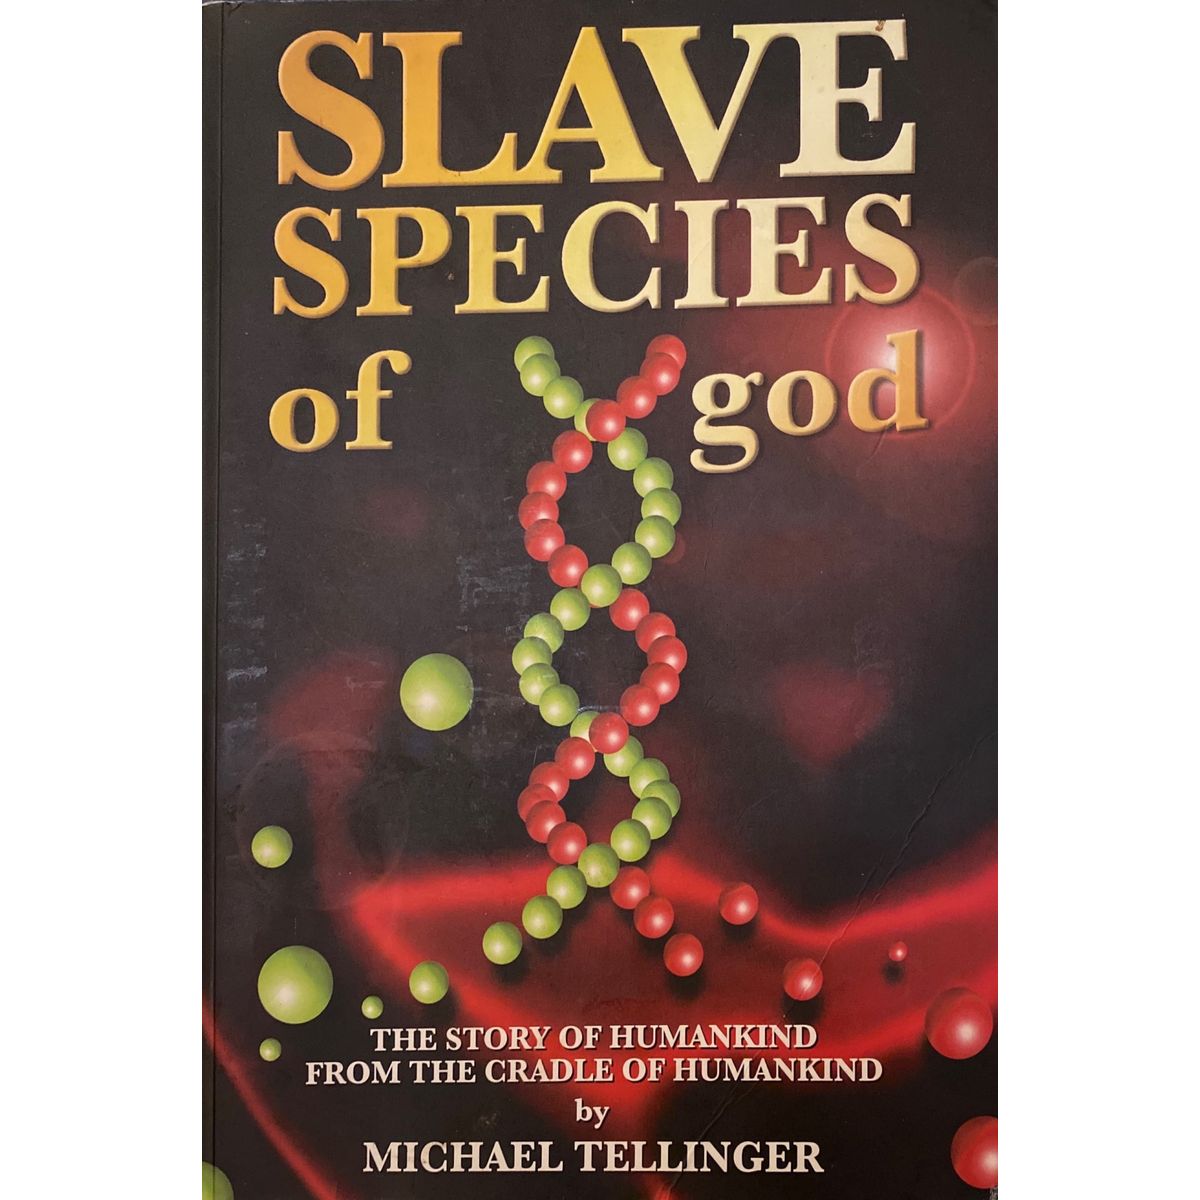 ISBN: 9781920070137 / 1920070133 - Slave Species of God: The Story of Humankind from the Cradle of Humankind by Michael Tellinger [2011]